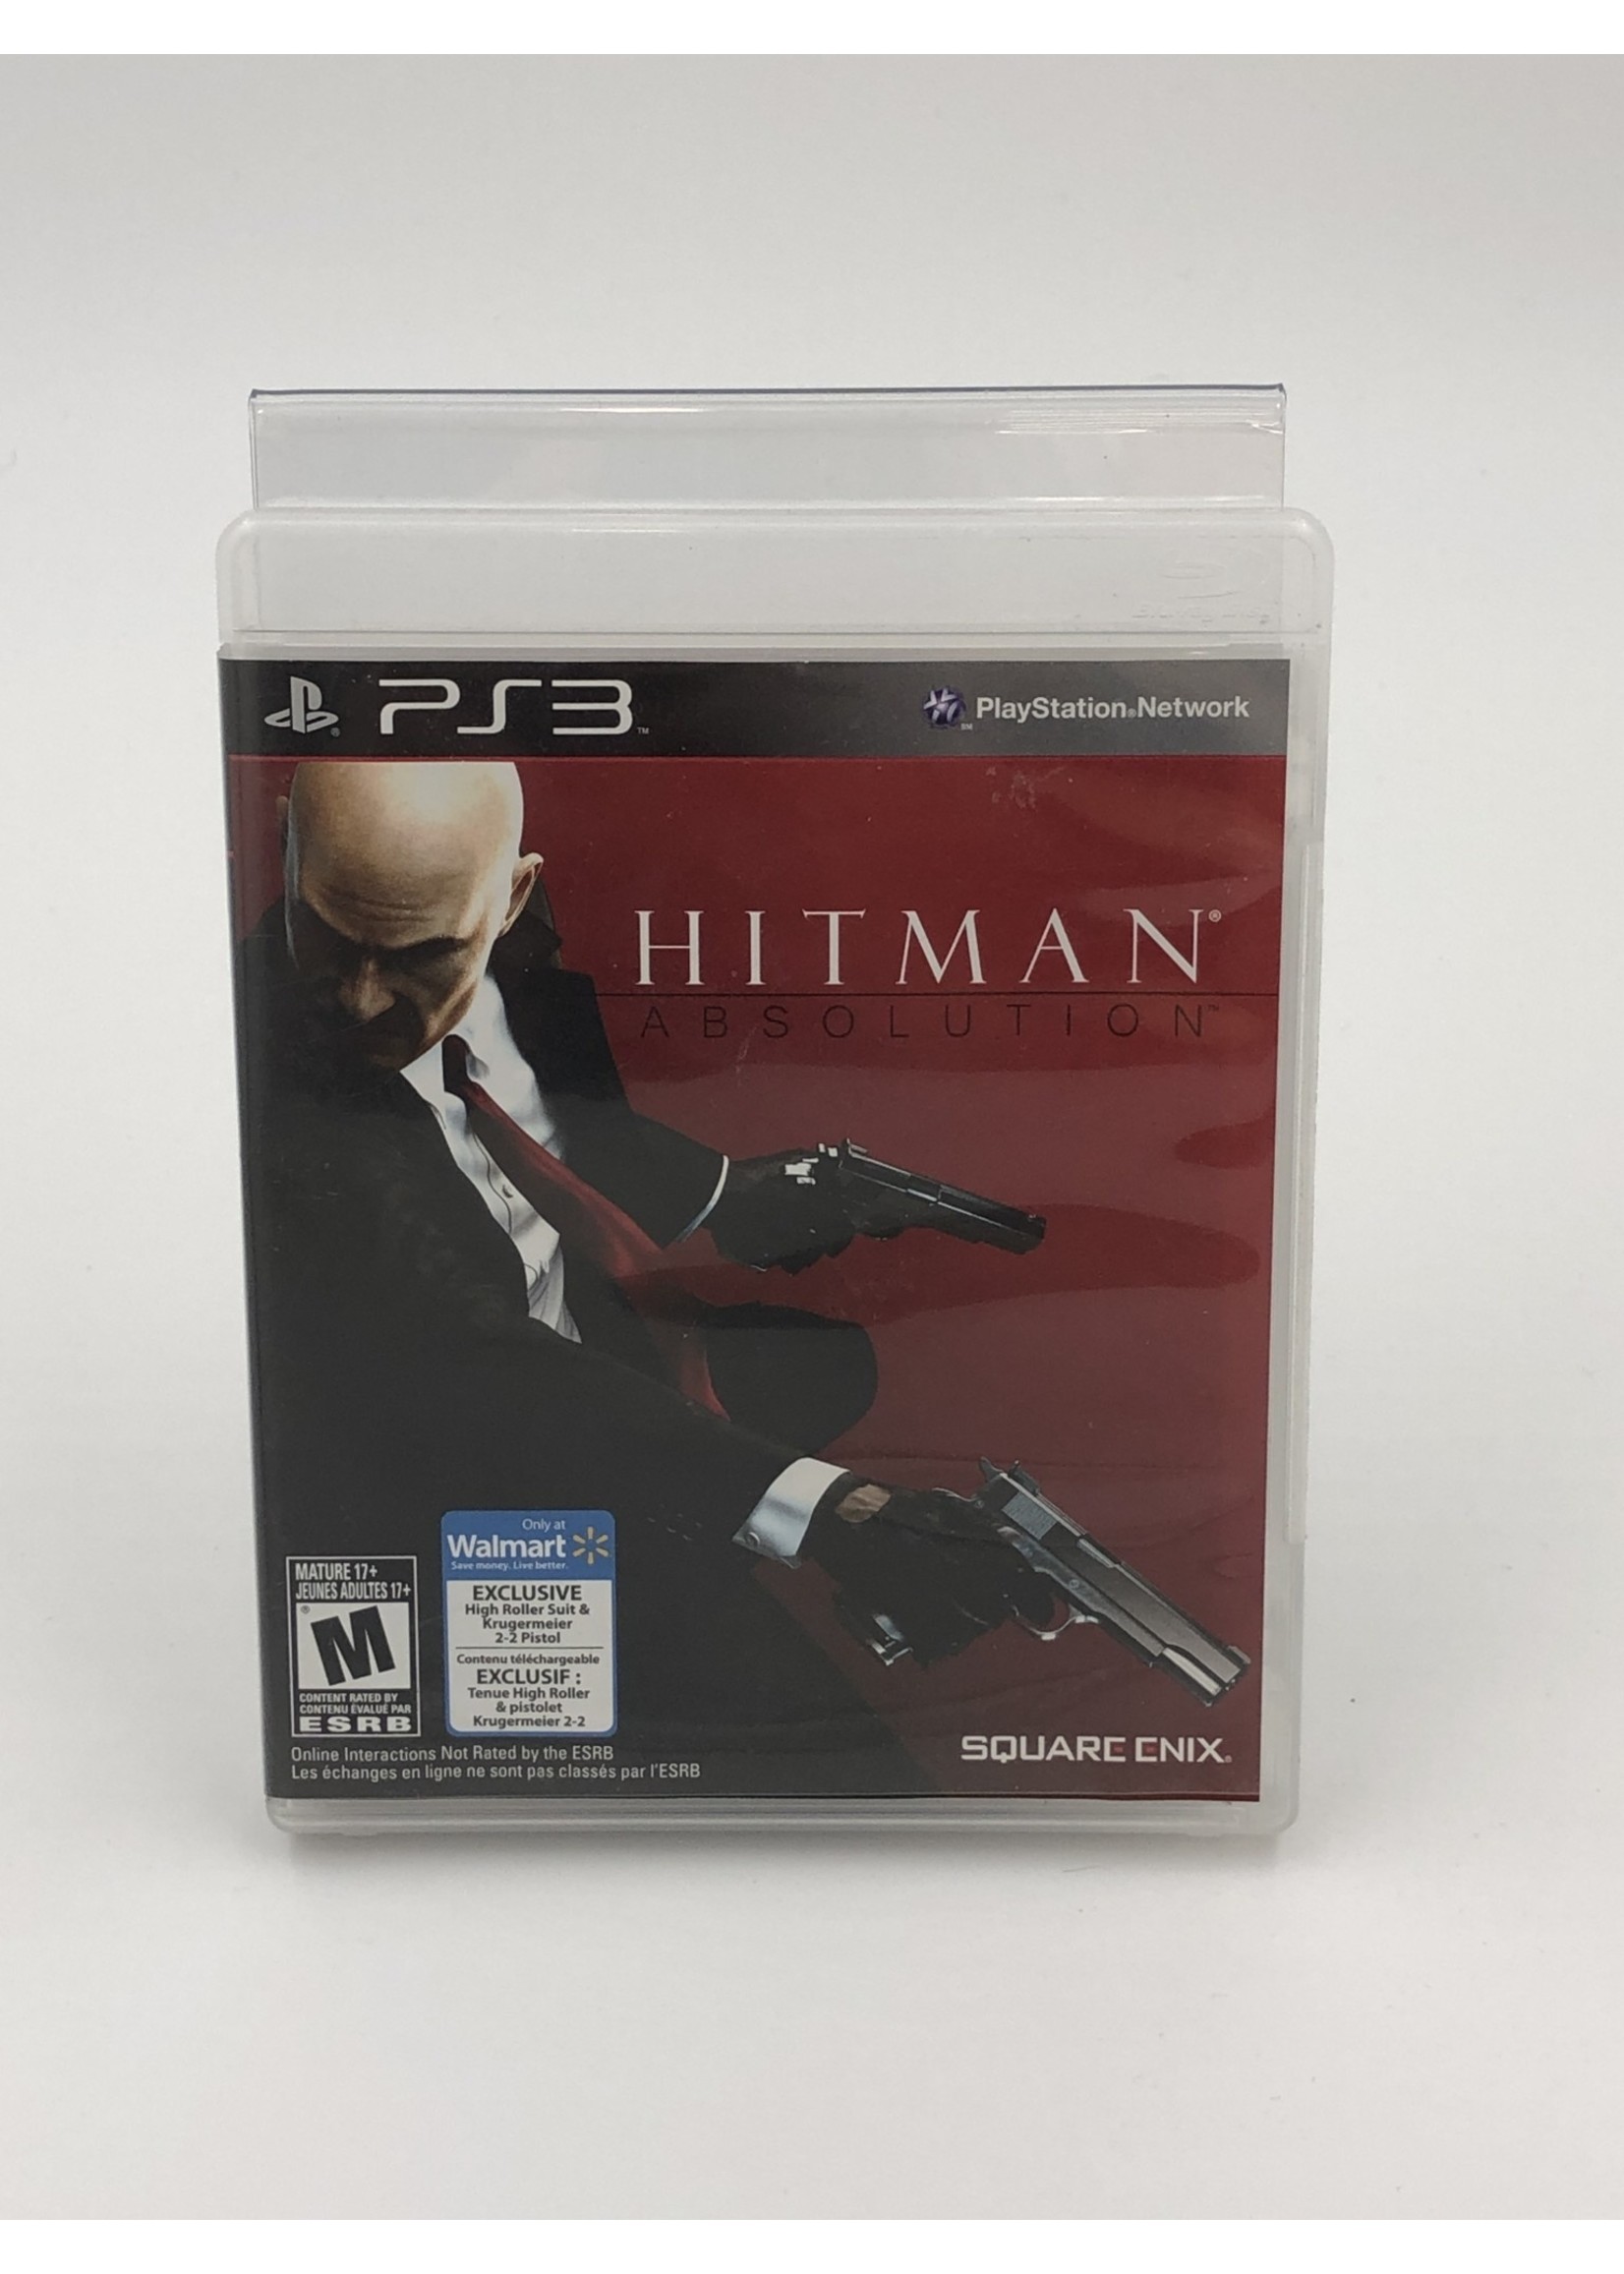 Sony Hitman: Absolution - PS3